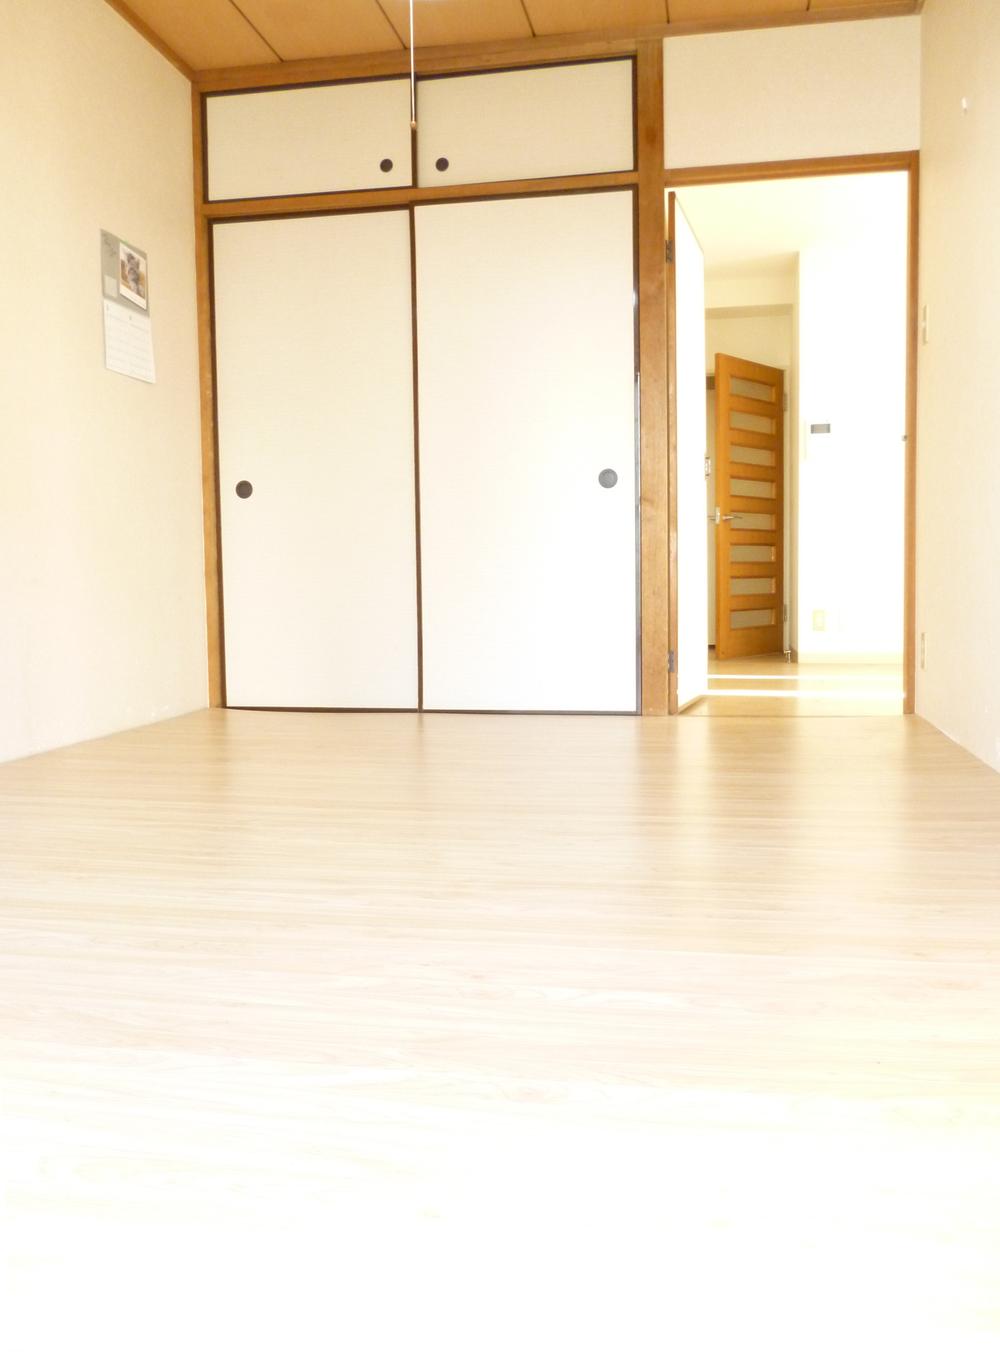 Non-living room. Japanese-style room (approximately 6.0 tatami mats) has laid a simple flooring